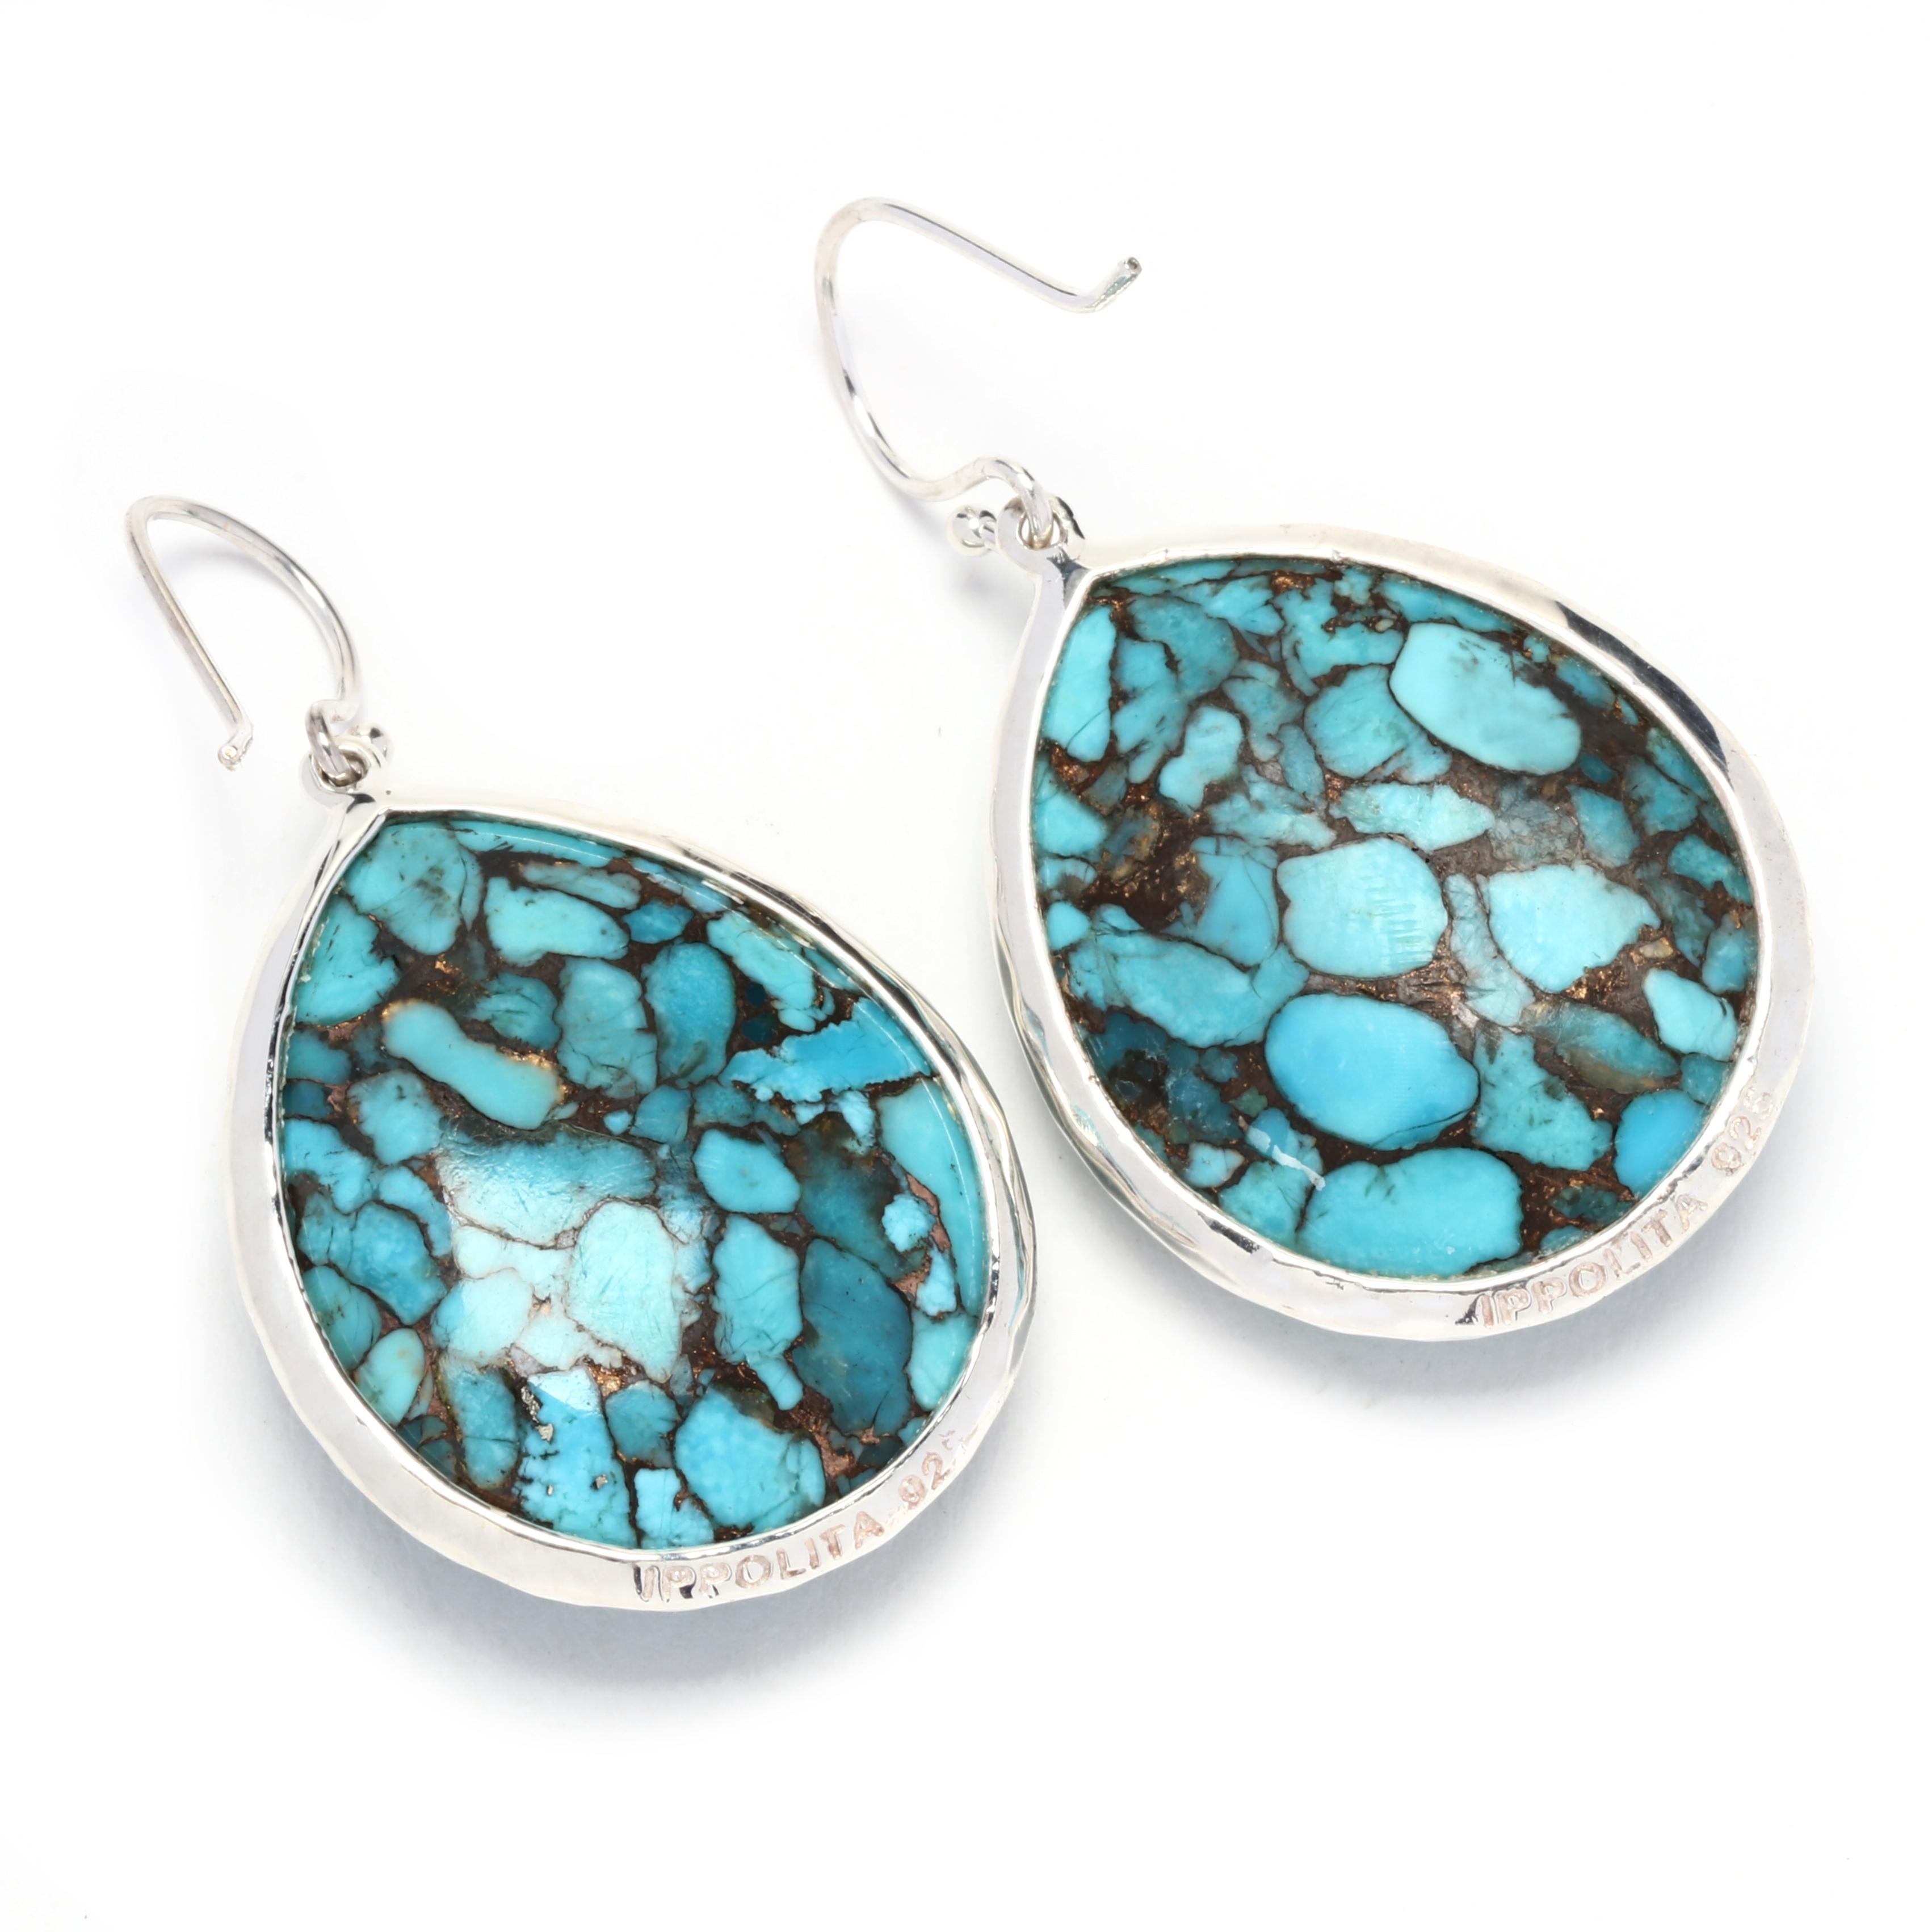 This Ippolita Rock Candy Bronze Turquoise Teardrop Earrings are a beautiful and unique addition to your jewelry collection. Made from sterling silver, these earrings feature teardrop-shaped turquoise gemstones that are set in a bronze bezel. With a